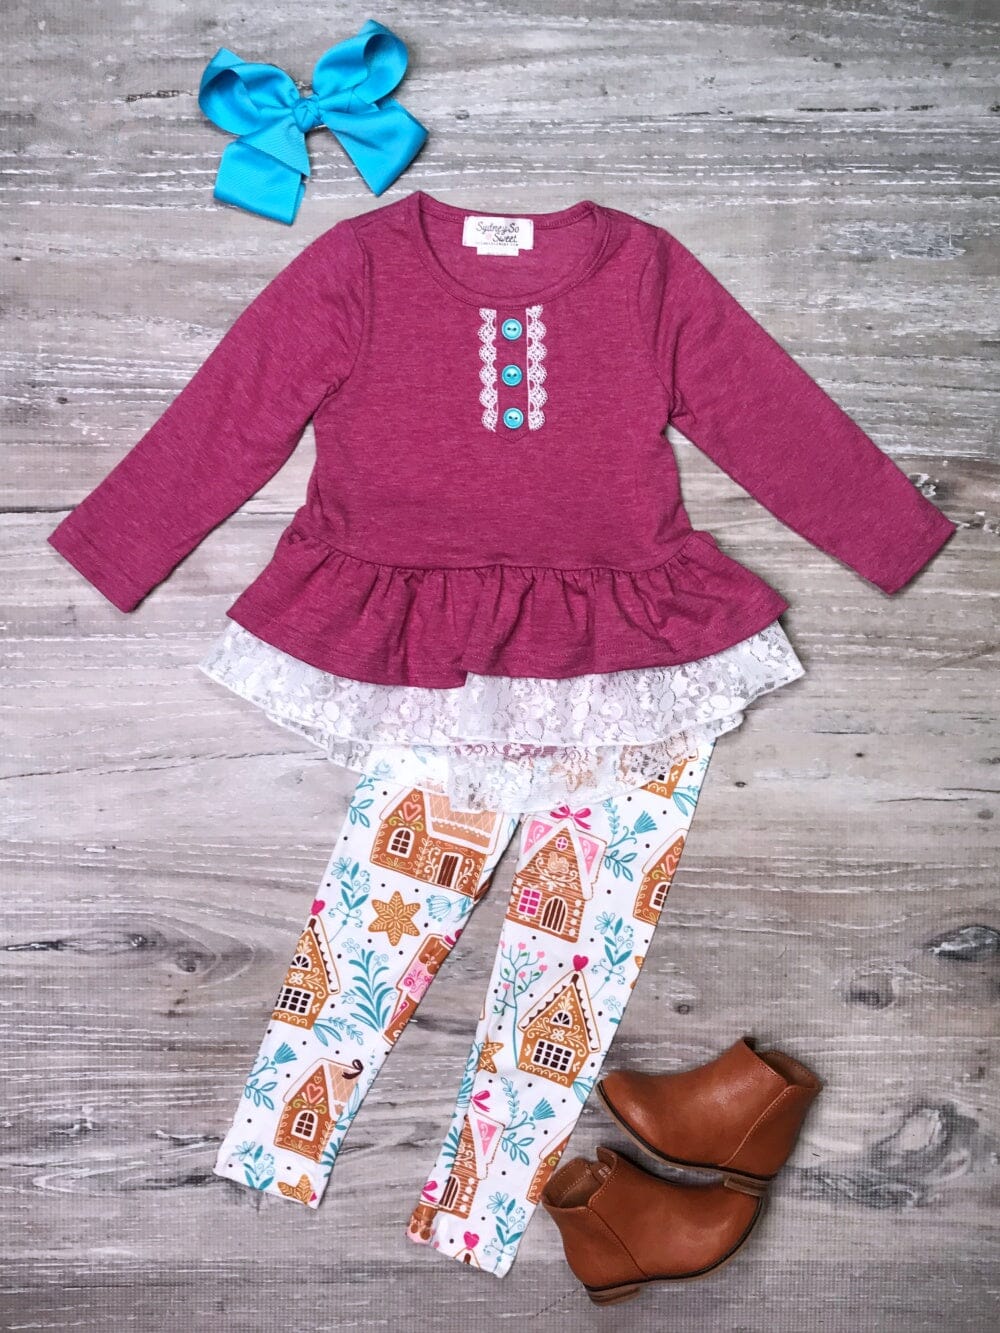 Home for the Holidays Plum Gingerbread Lace Outfit